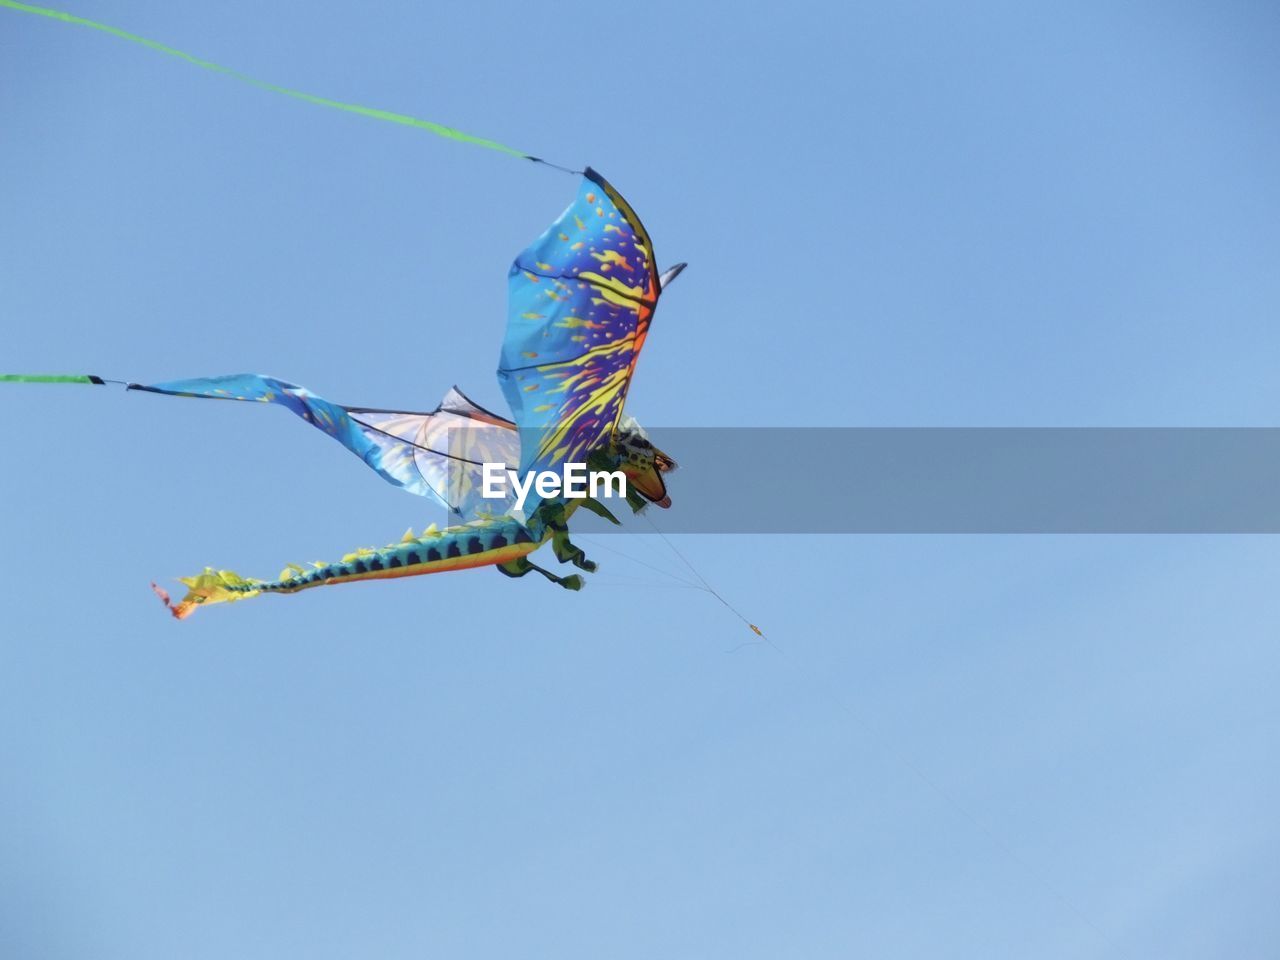 Low angle view of dragon shaped kite flying against clear sky